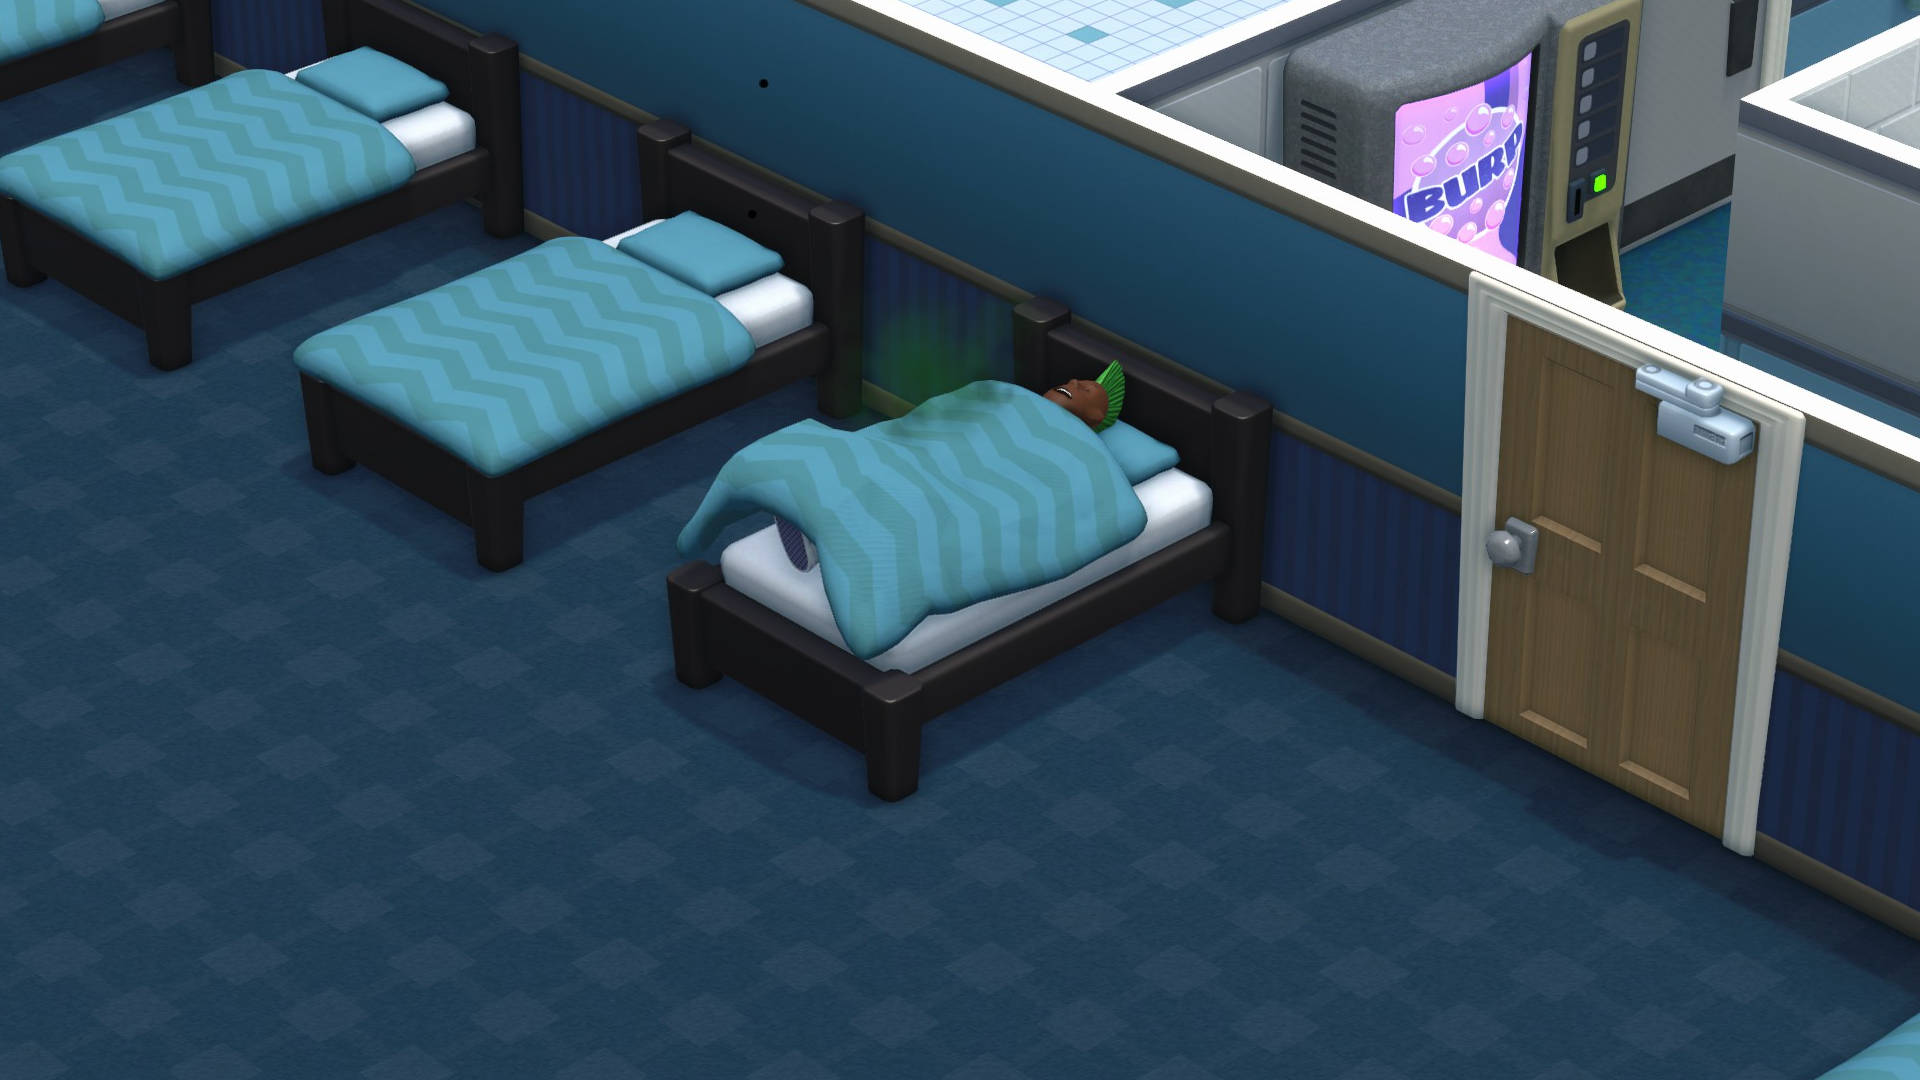 Two Point Campus: a rather smelly student is sleeping in a bed.